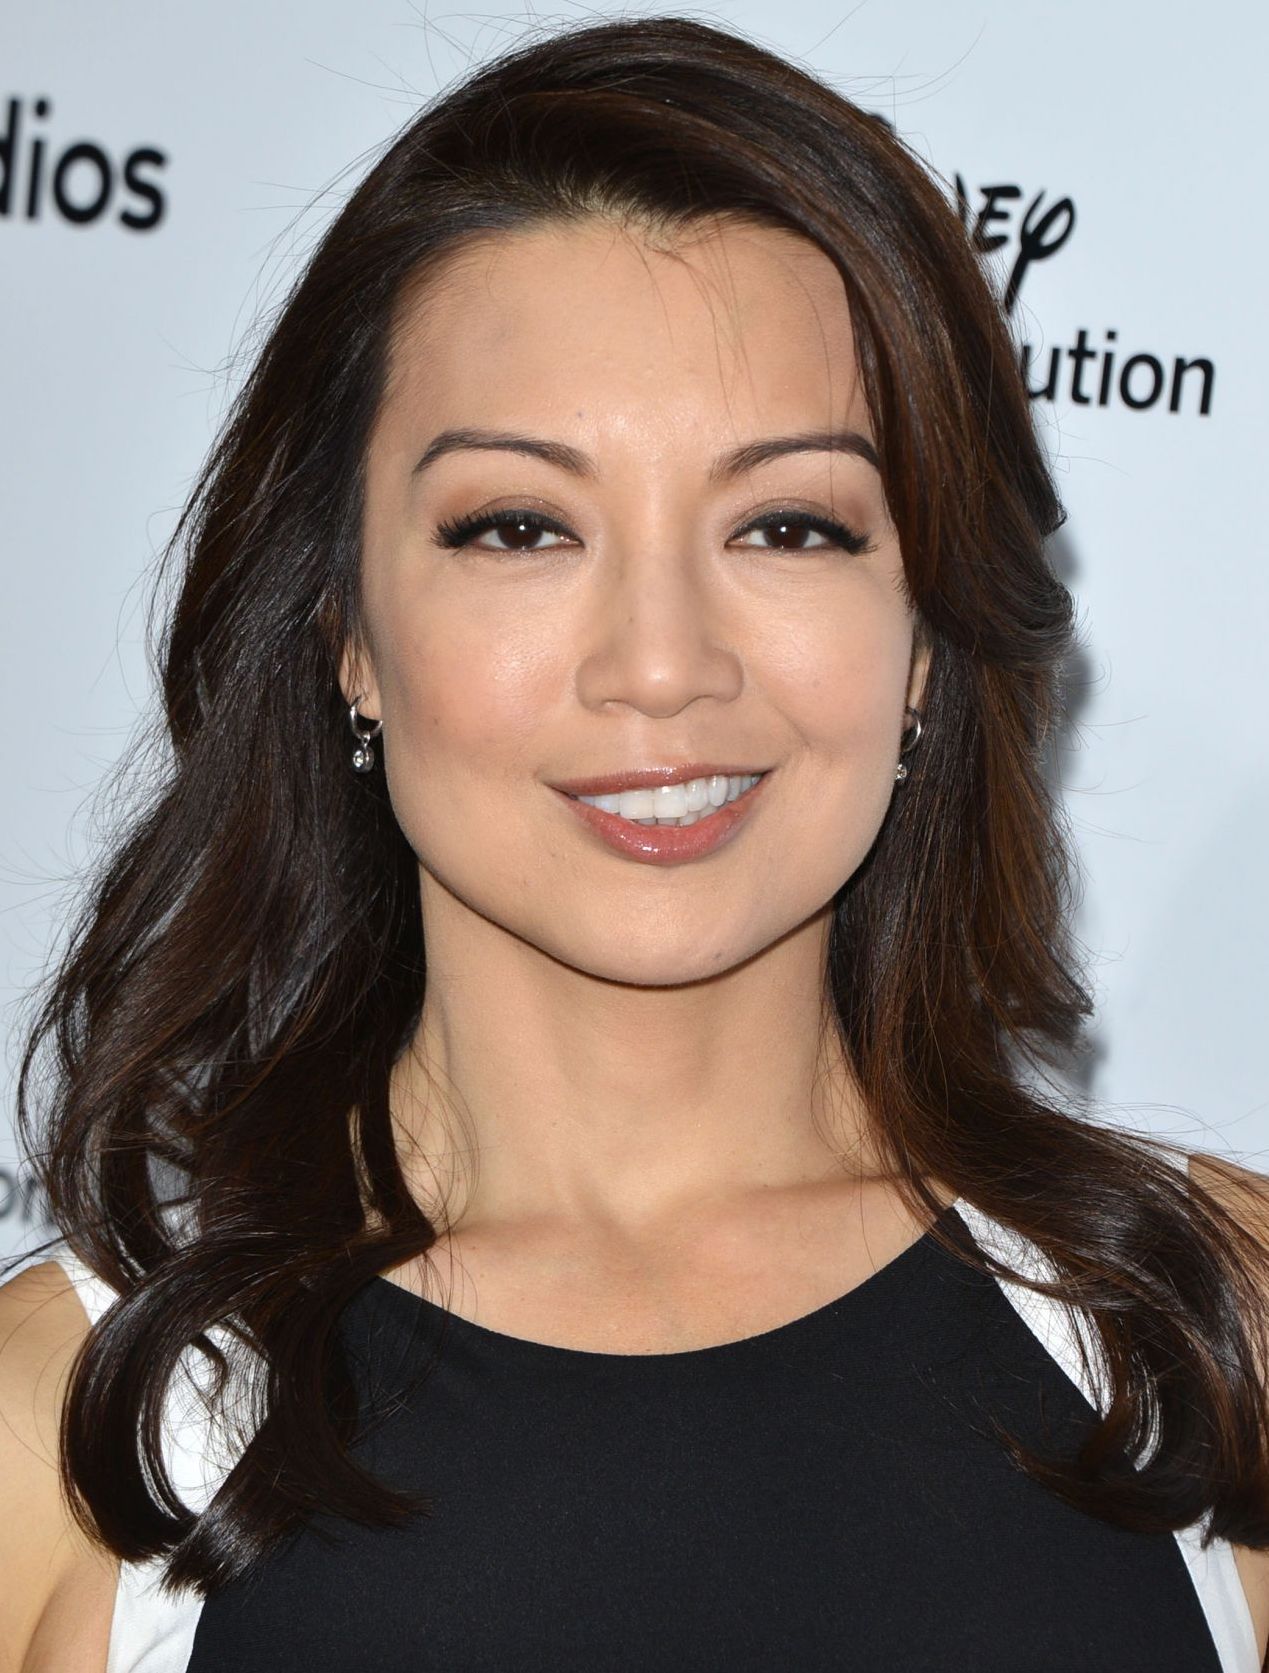 https://static.wikia.nocookie.net/disney/images/4/40/Ming-Na_Wen.jpg/revision/latest?cb=20190513200004